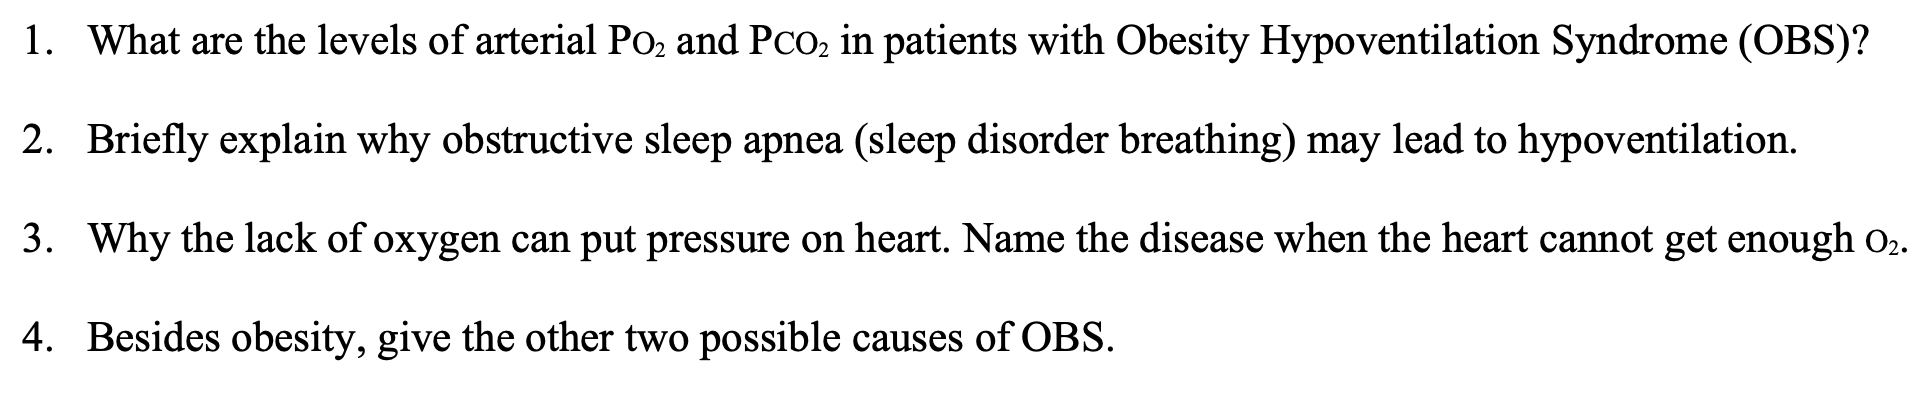 1. What are the levels of arterial Po, and Pco, in patients with Obesity Hypoventilation Syndrome (OBS)?
2. Briefly explain why obstructive sleep apnea (sleep disorder breathing) may lead to hypoventilation.
3. Why the lack of oxygen can put pressure on heart. Name the disease when the heart cannot get enough 02.
4. Besides obesity, give the other two possible causes of OBS.
